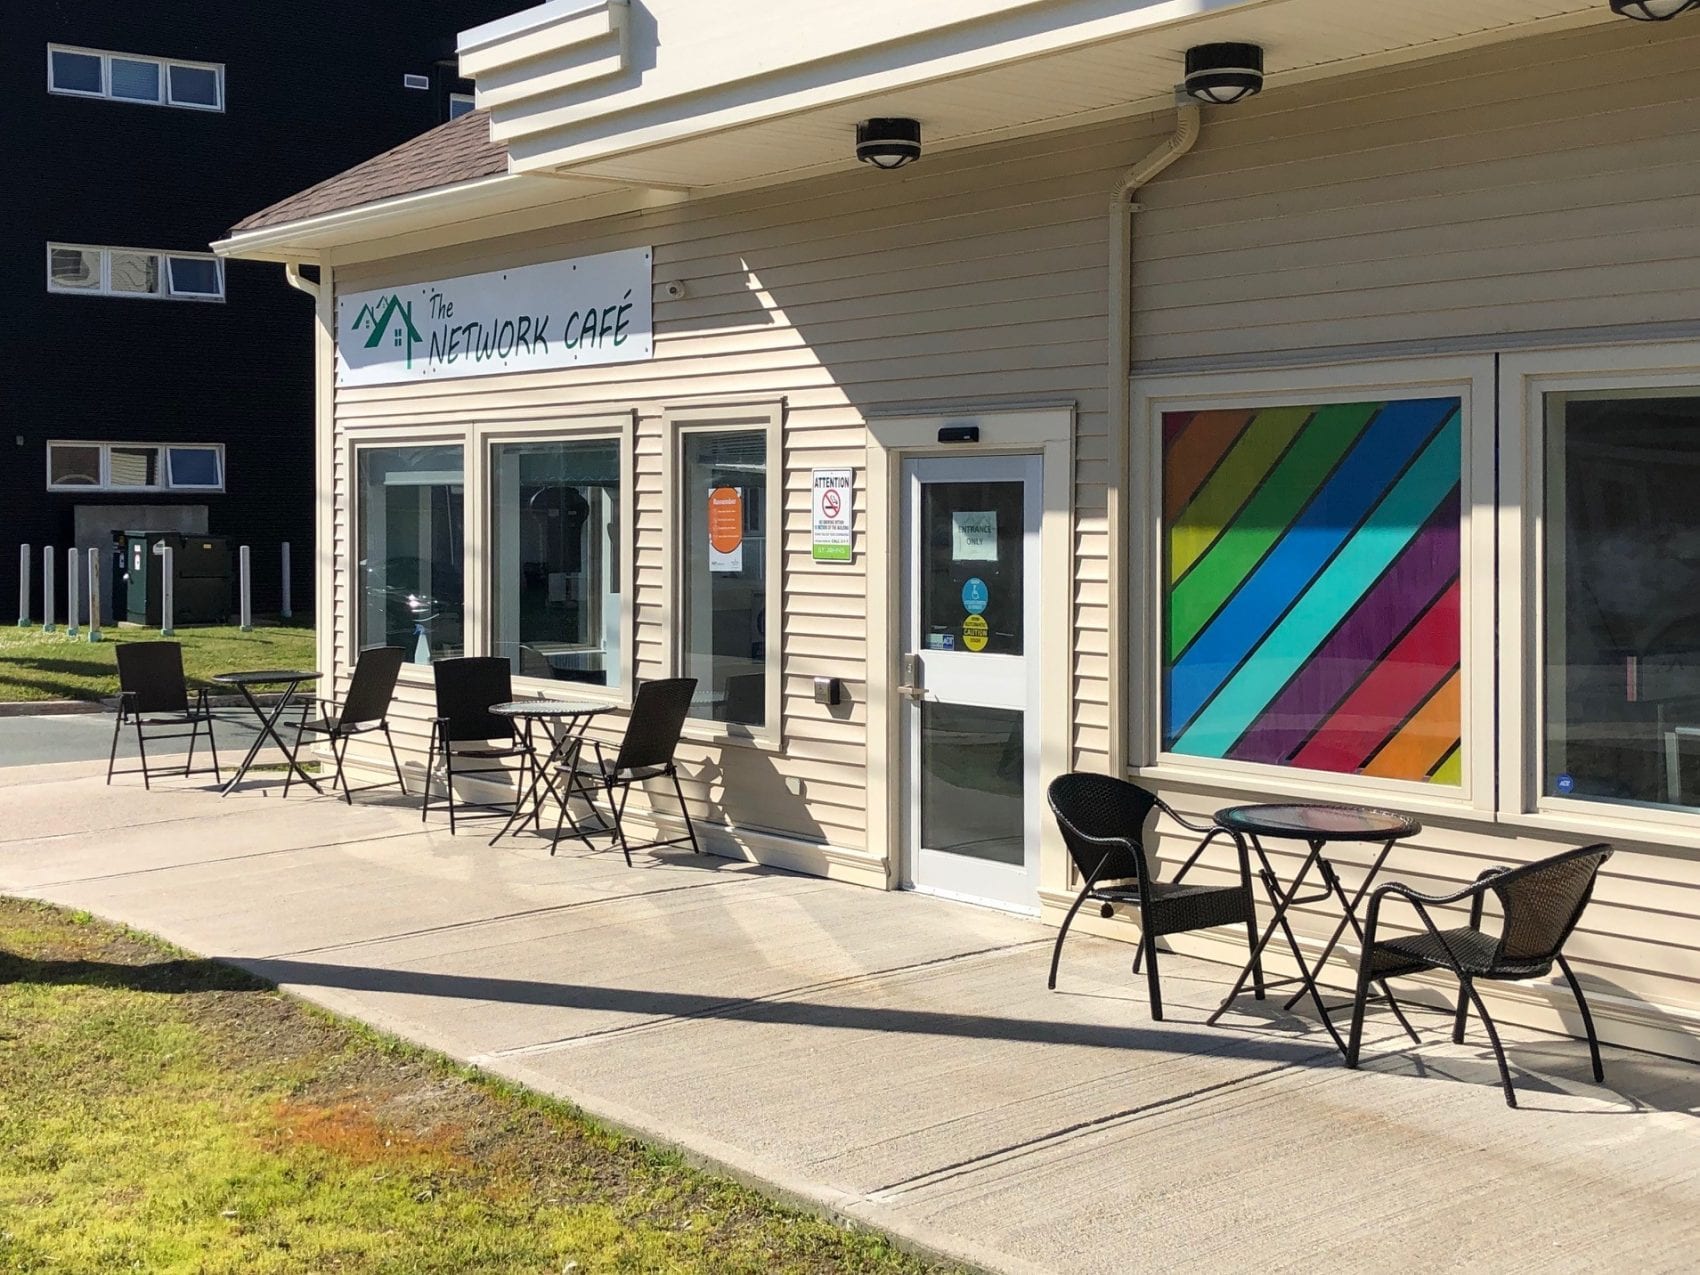 Am image of the patio of the Network Café. There are patio chairs and tables outside the entrance. A window is decorated in rainbow colors, and a sign reads "The Network Café" over the windows of the café.